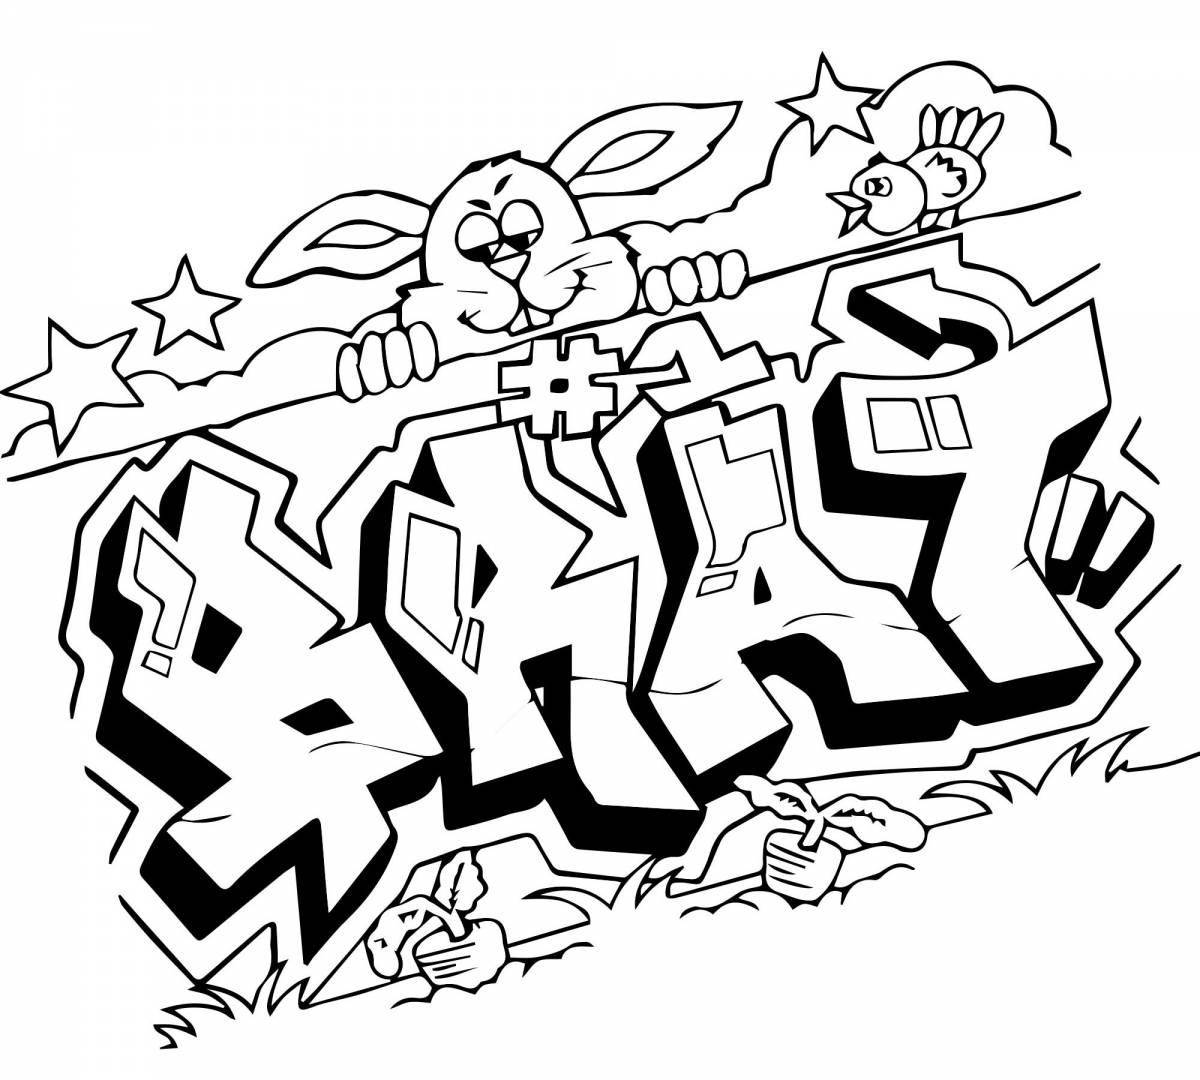 Color-radiant graffiti coloring page for boys